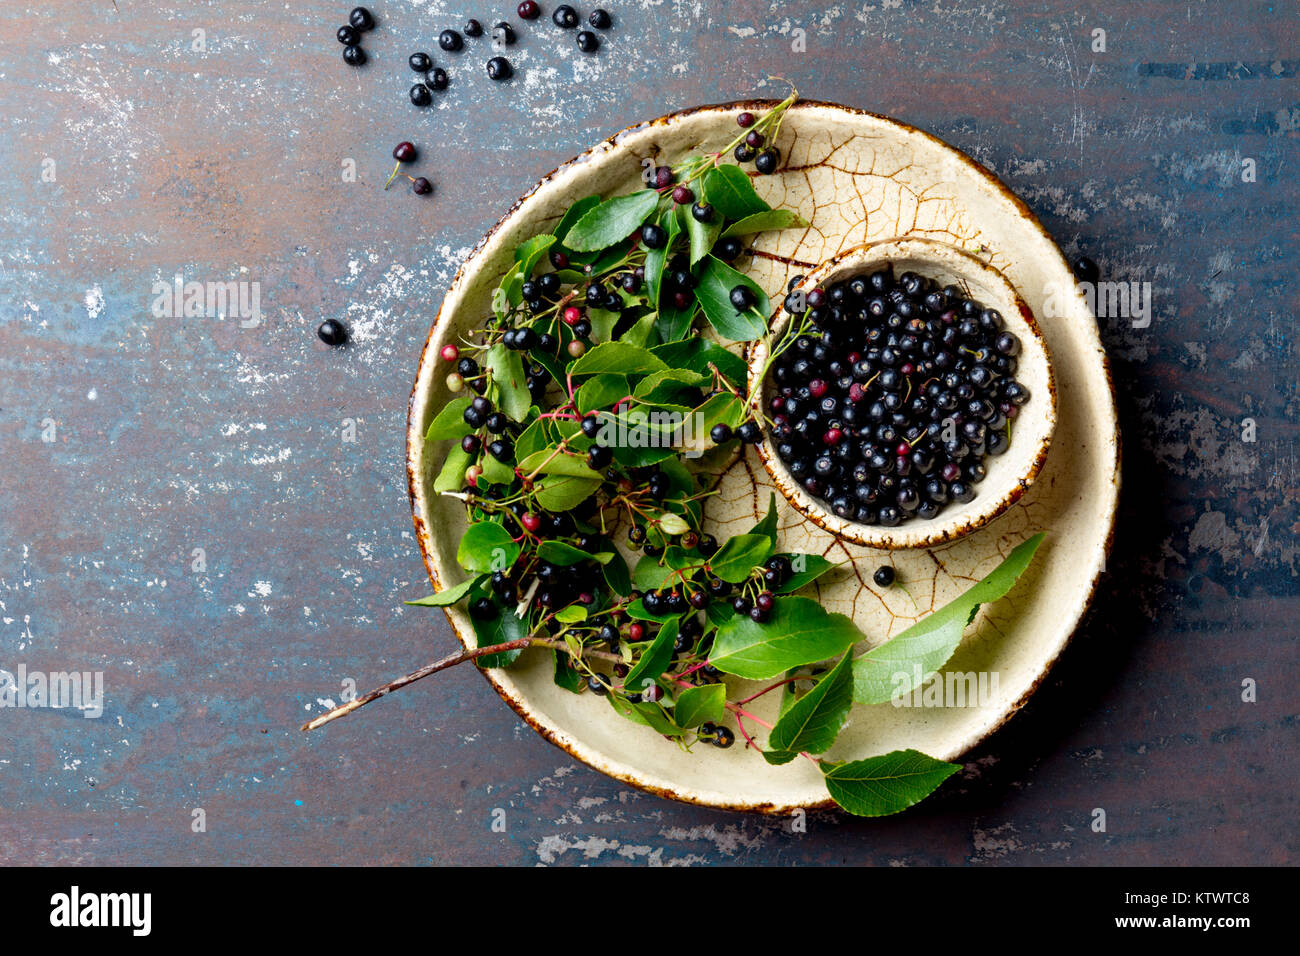 Superfood MAQUI BERRY. Superfoods antioxidant of indian mapuche, Chile. Bowl of fresh maqui berry and maqui berry tree branch on metal background, top Stock Photo